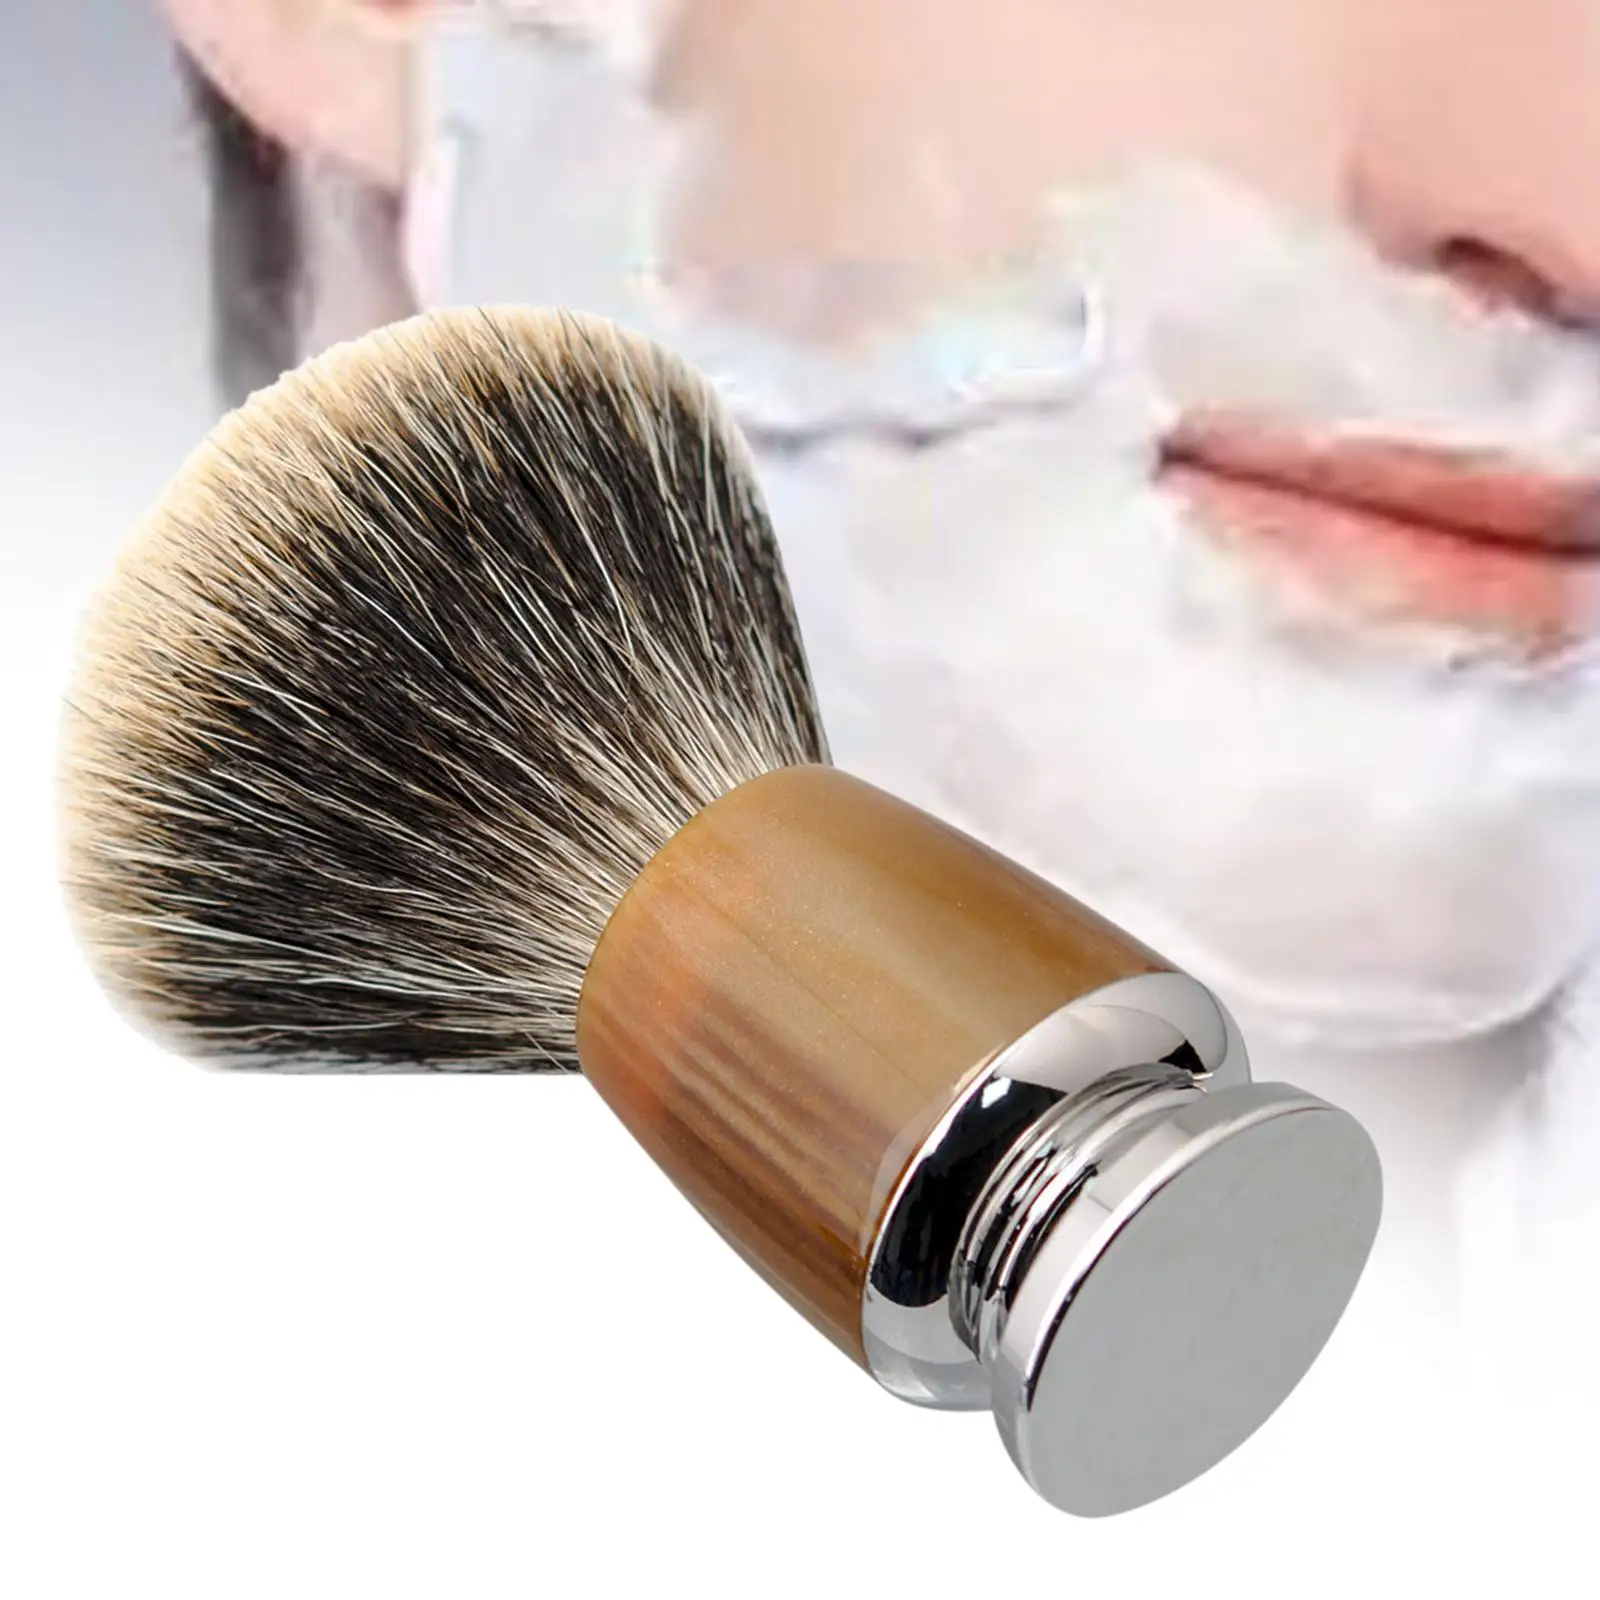 Shaving Brush for Men Shave Brush Classic Wet Shave Handmade Rich and Fast Lather Shaving Cream Beard Cleaning for Dad Boyfriend